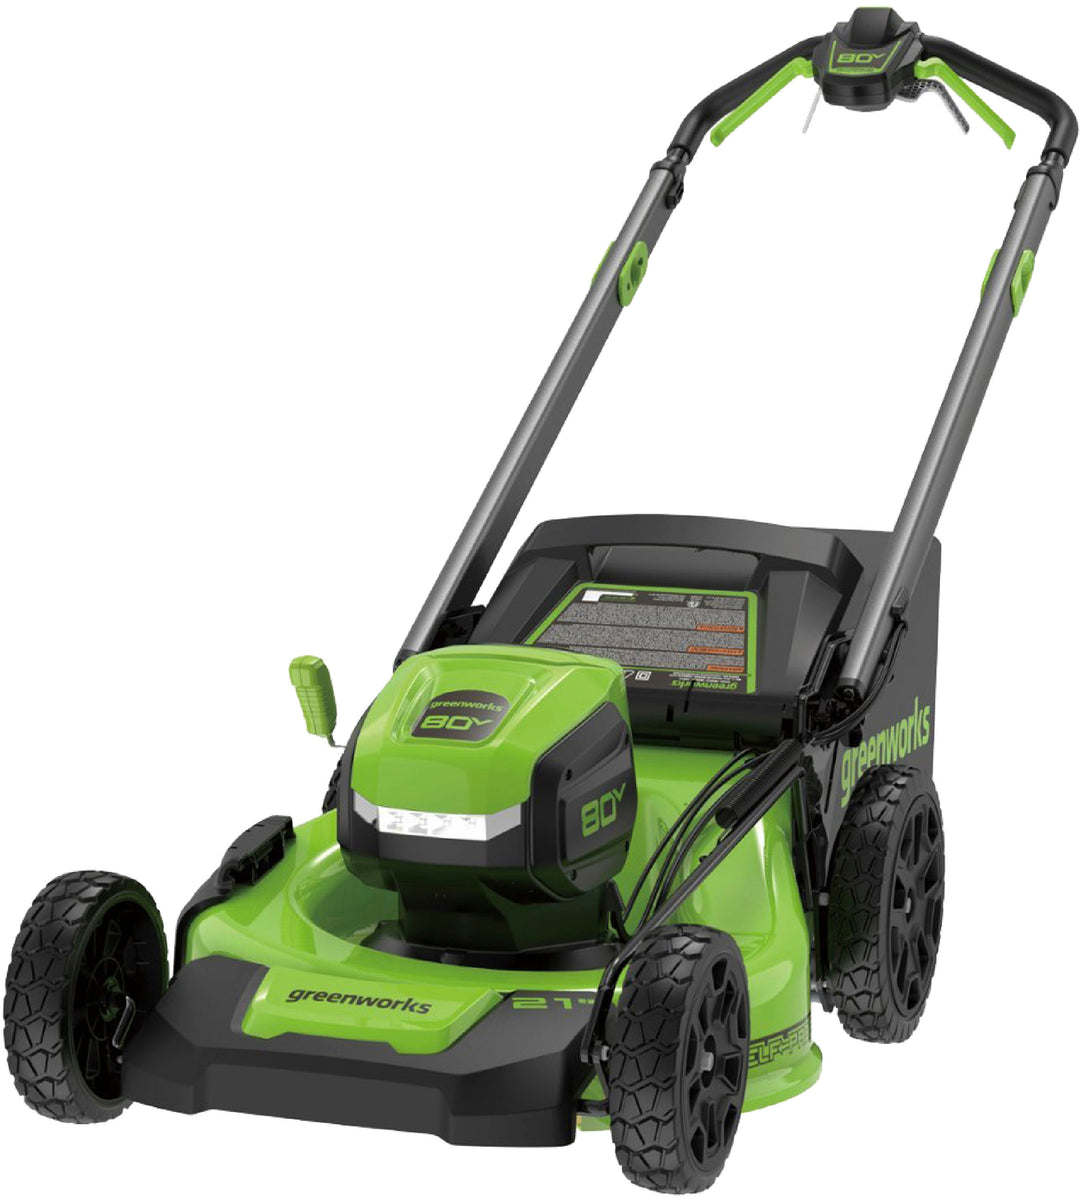 Greenworks - 80 Volt 21-Inch Self-Propelled Lawn Mower (1 x 4.0Ah Battery and 1 x Charger) - Green_1